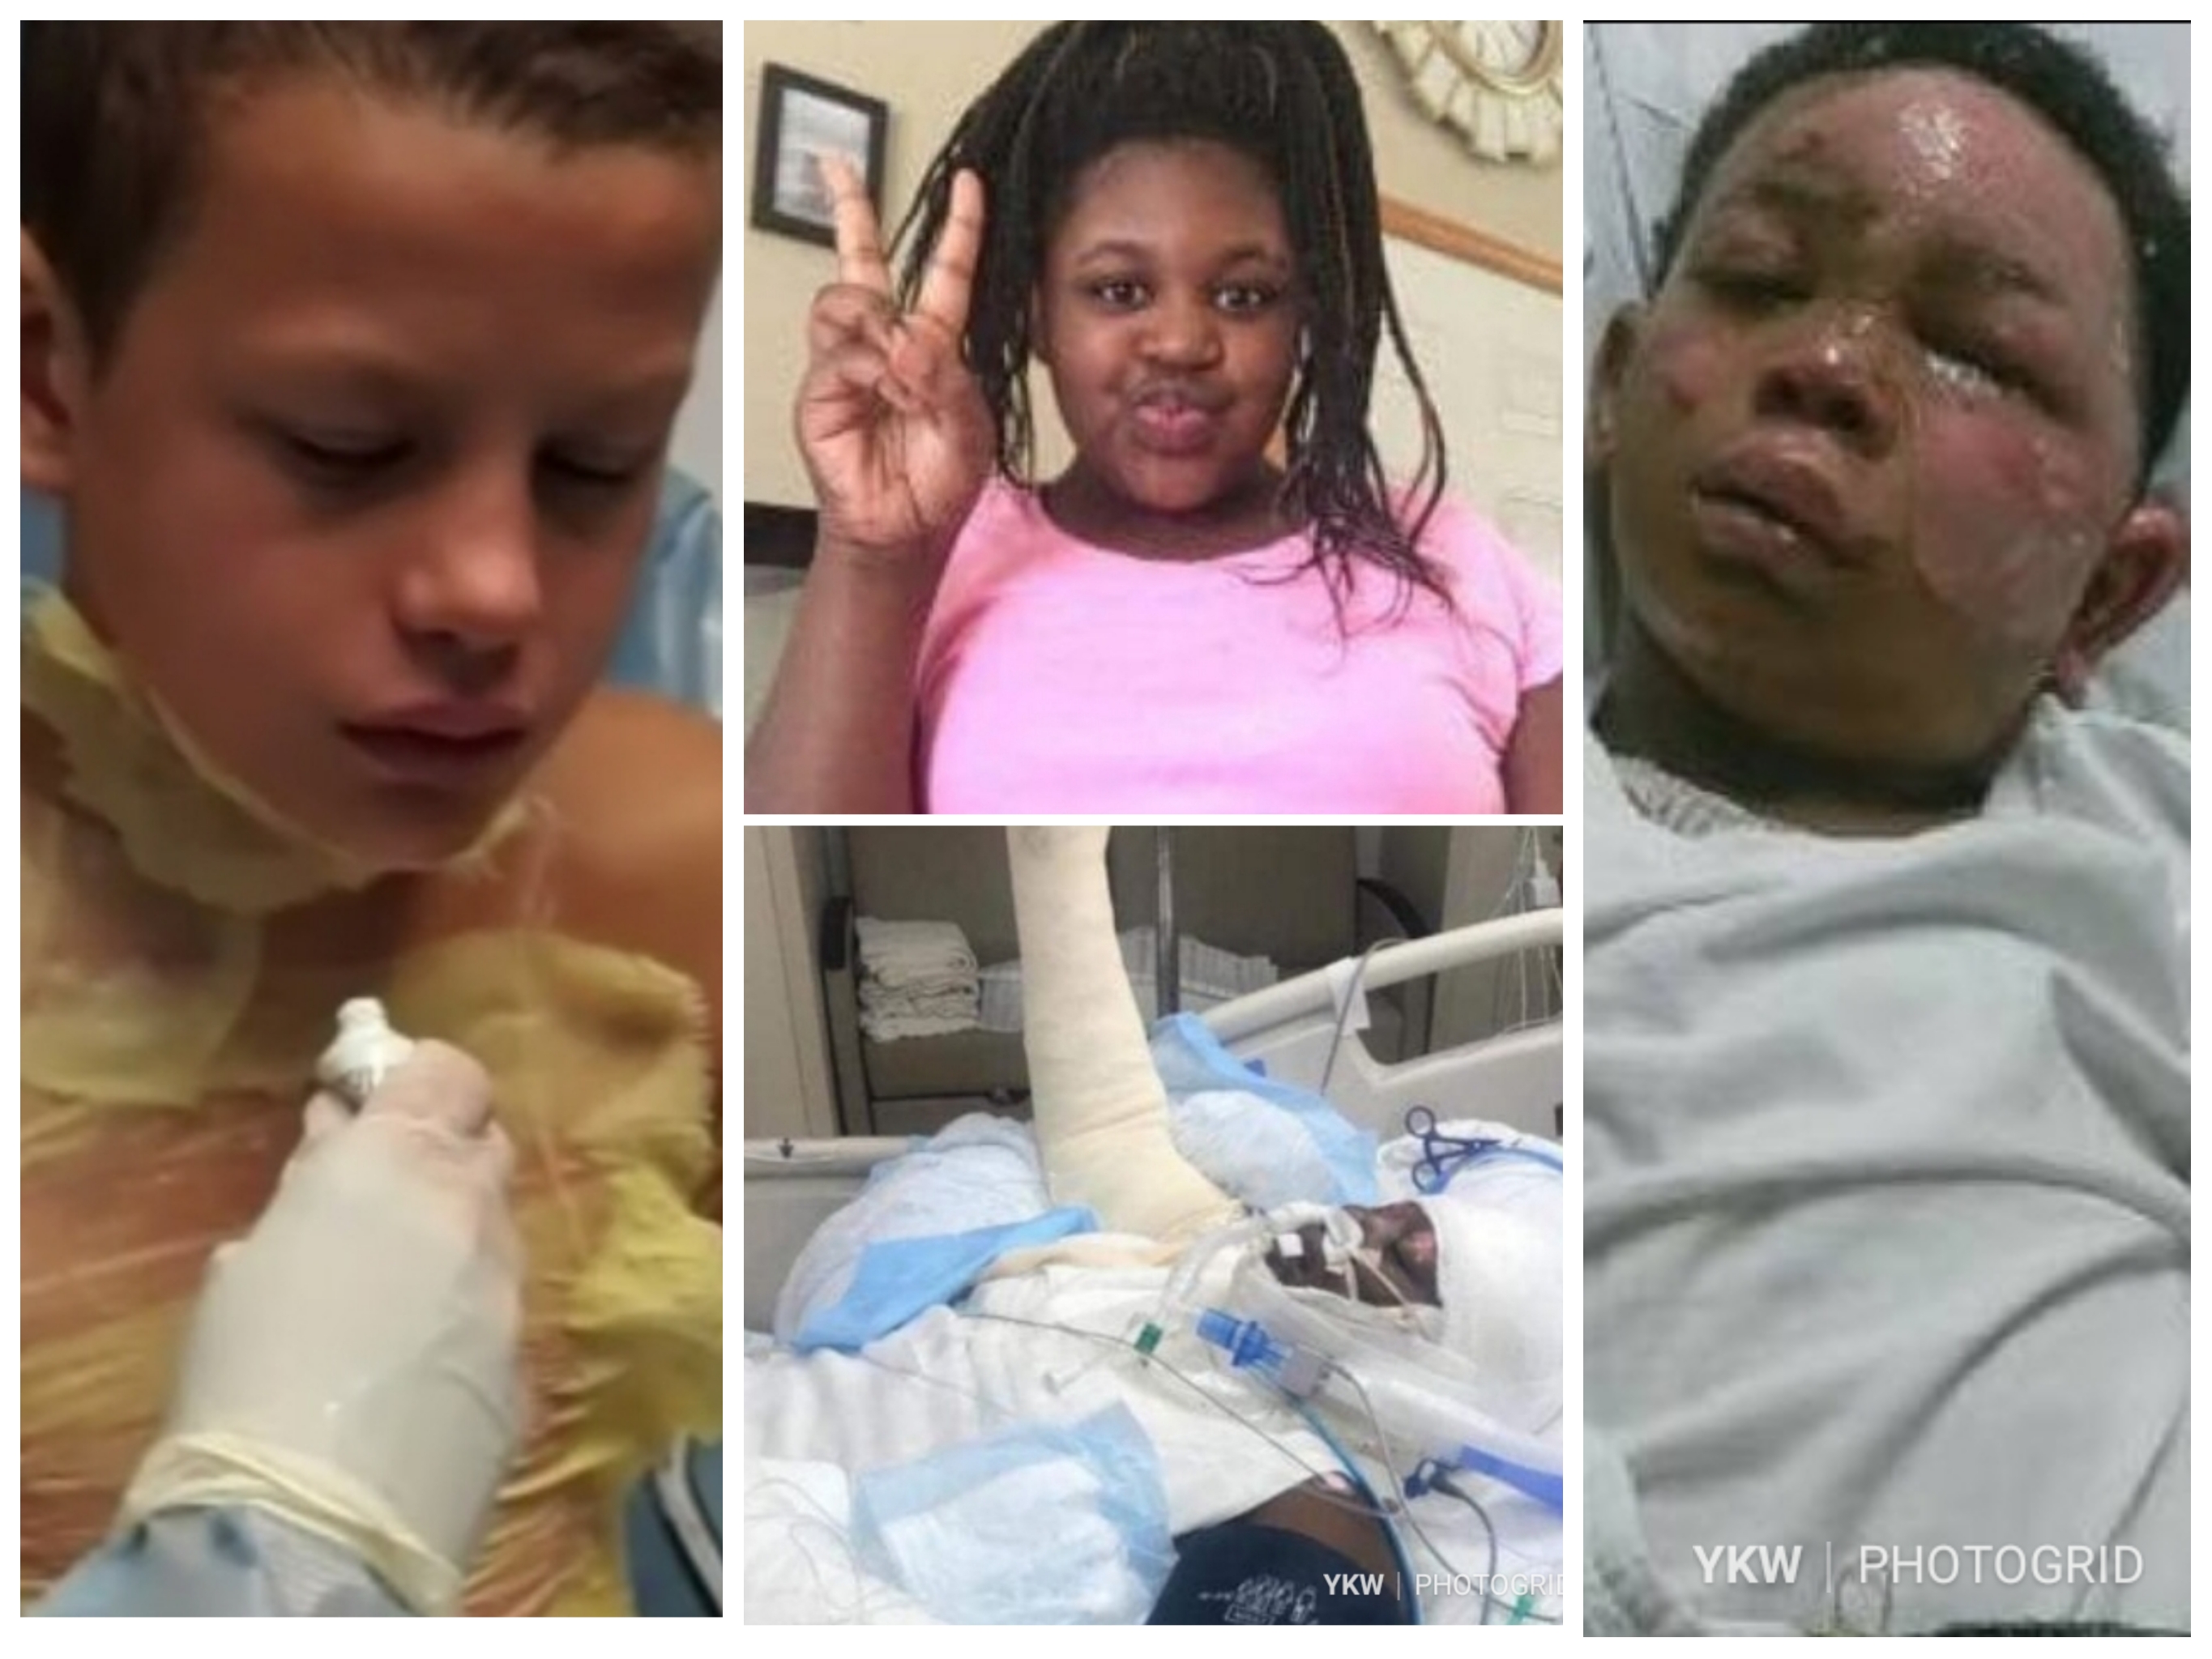 Mothers Warn Public About The “Fire Challenge” After Children Are Severely Burned